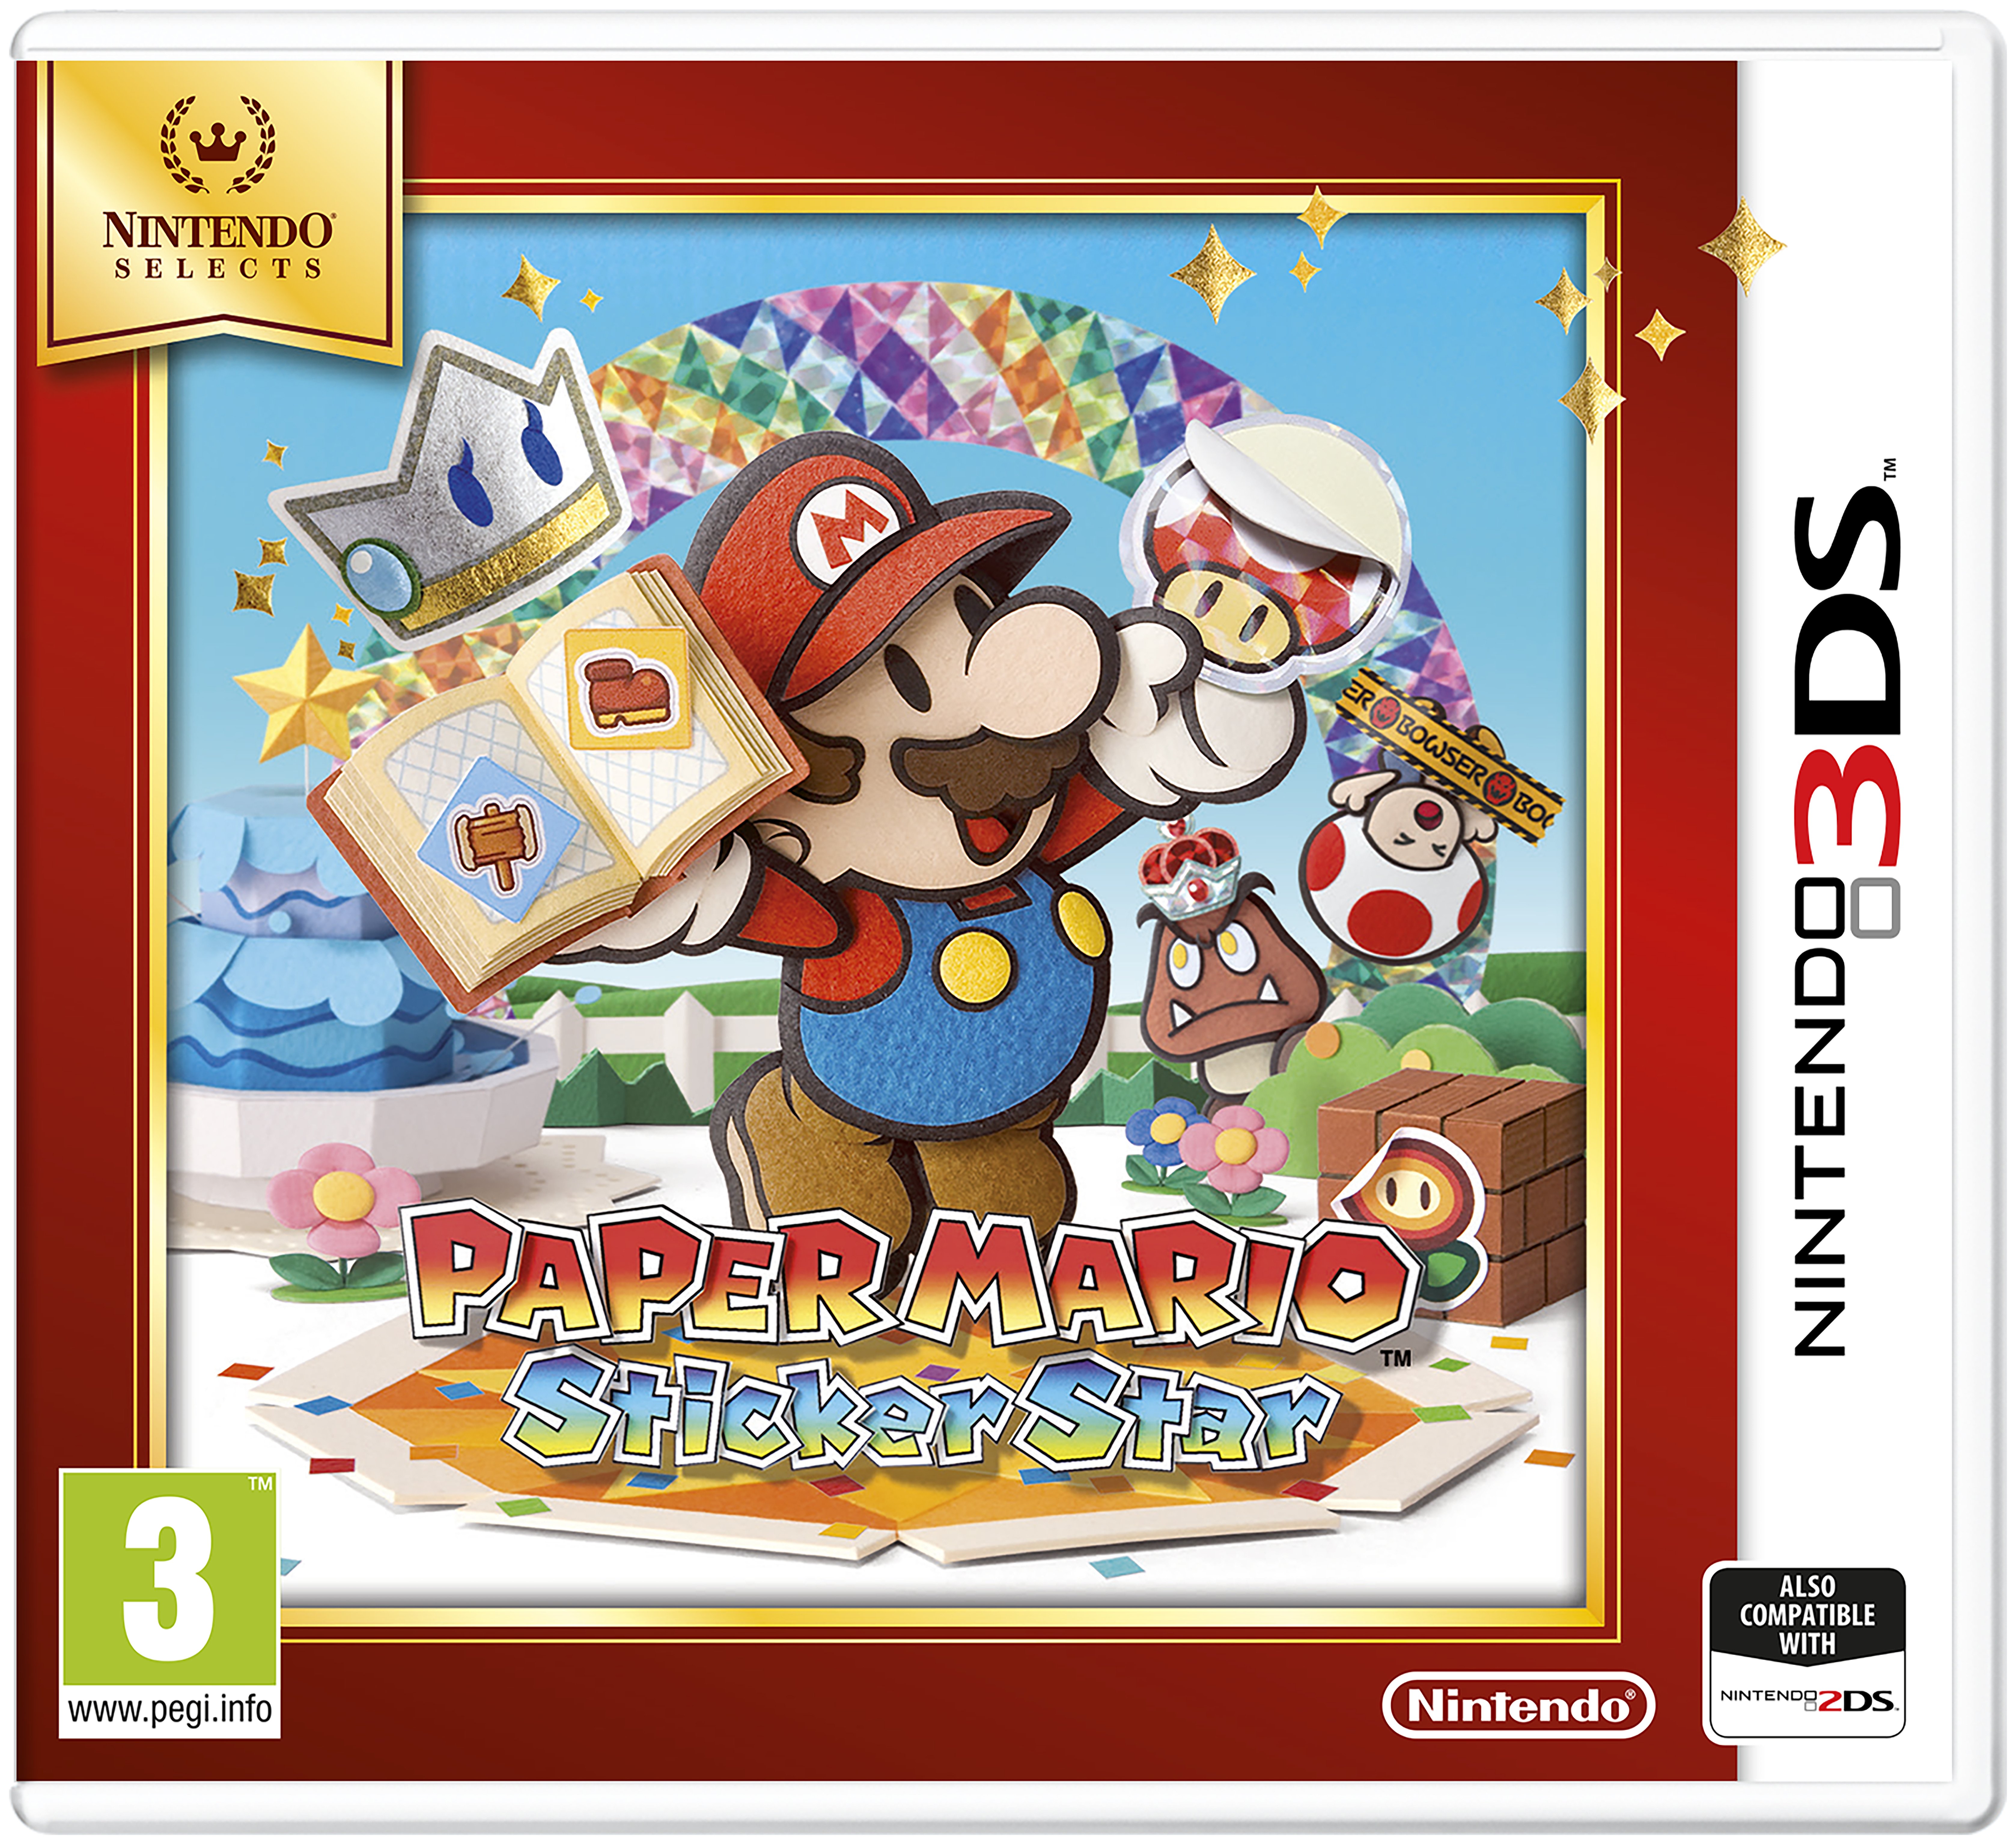 Paper Mario Sticker Star Nintendo Selects 3DS Game